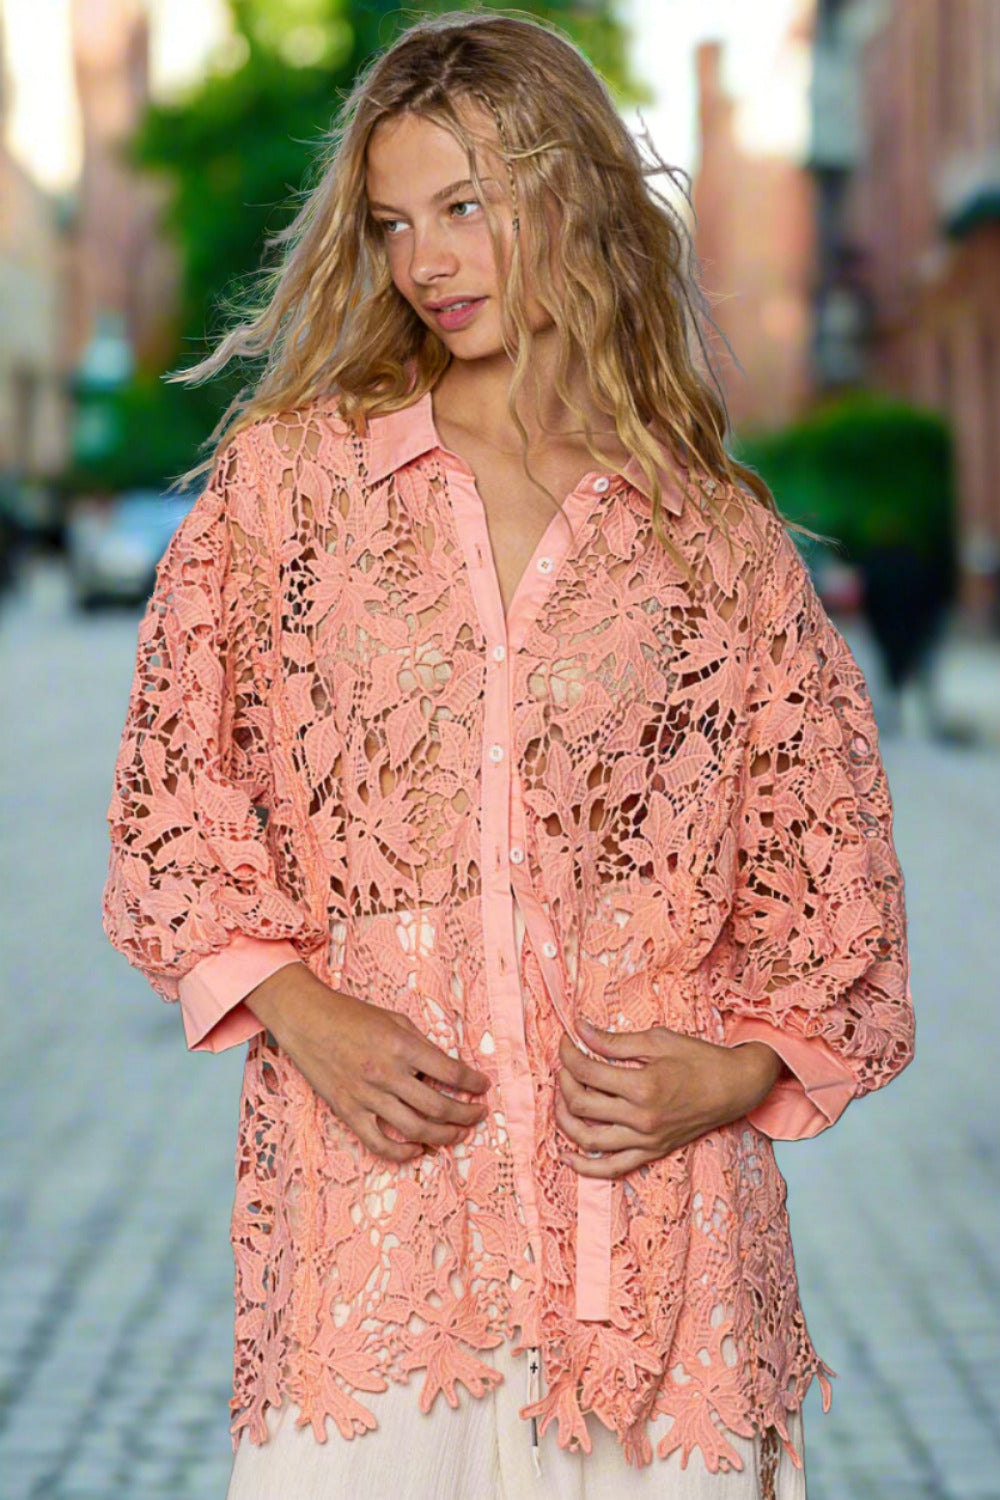 Model wearing peach coral lace shirt